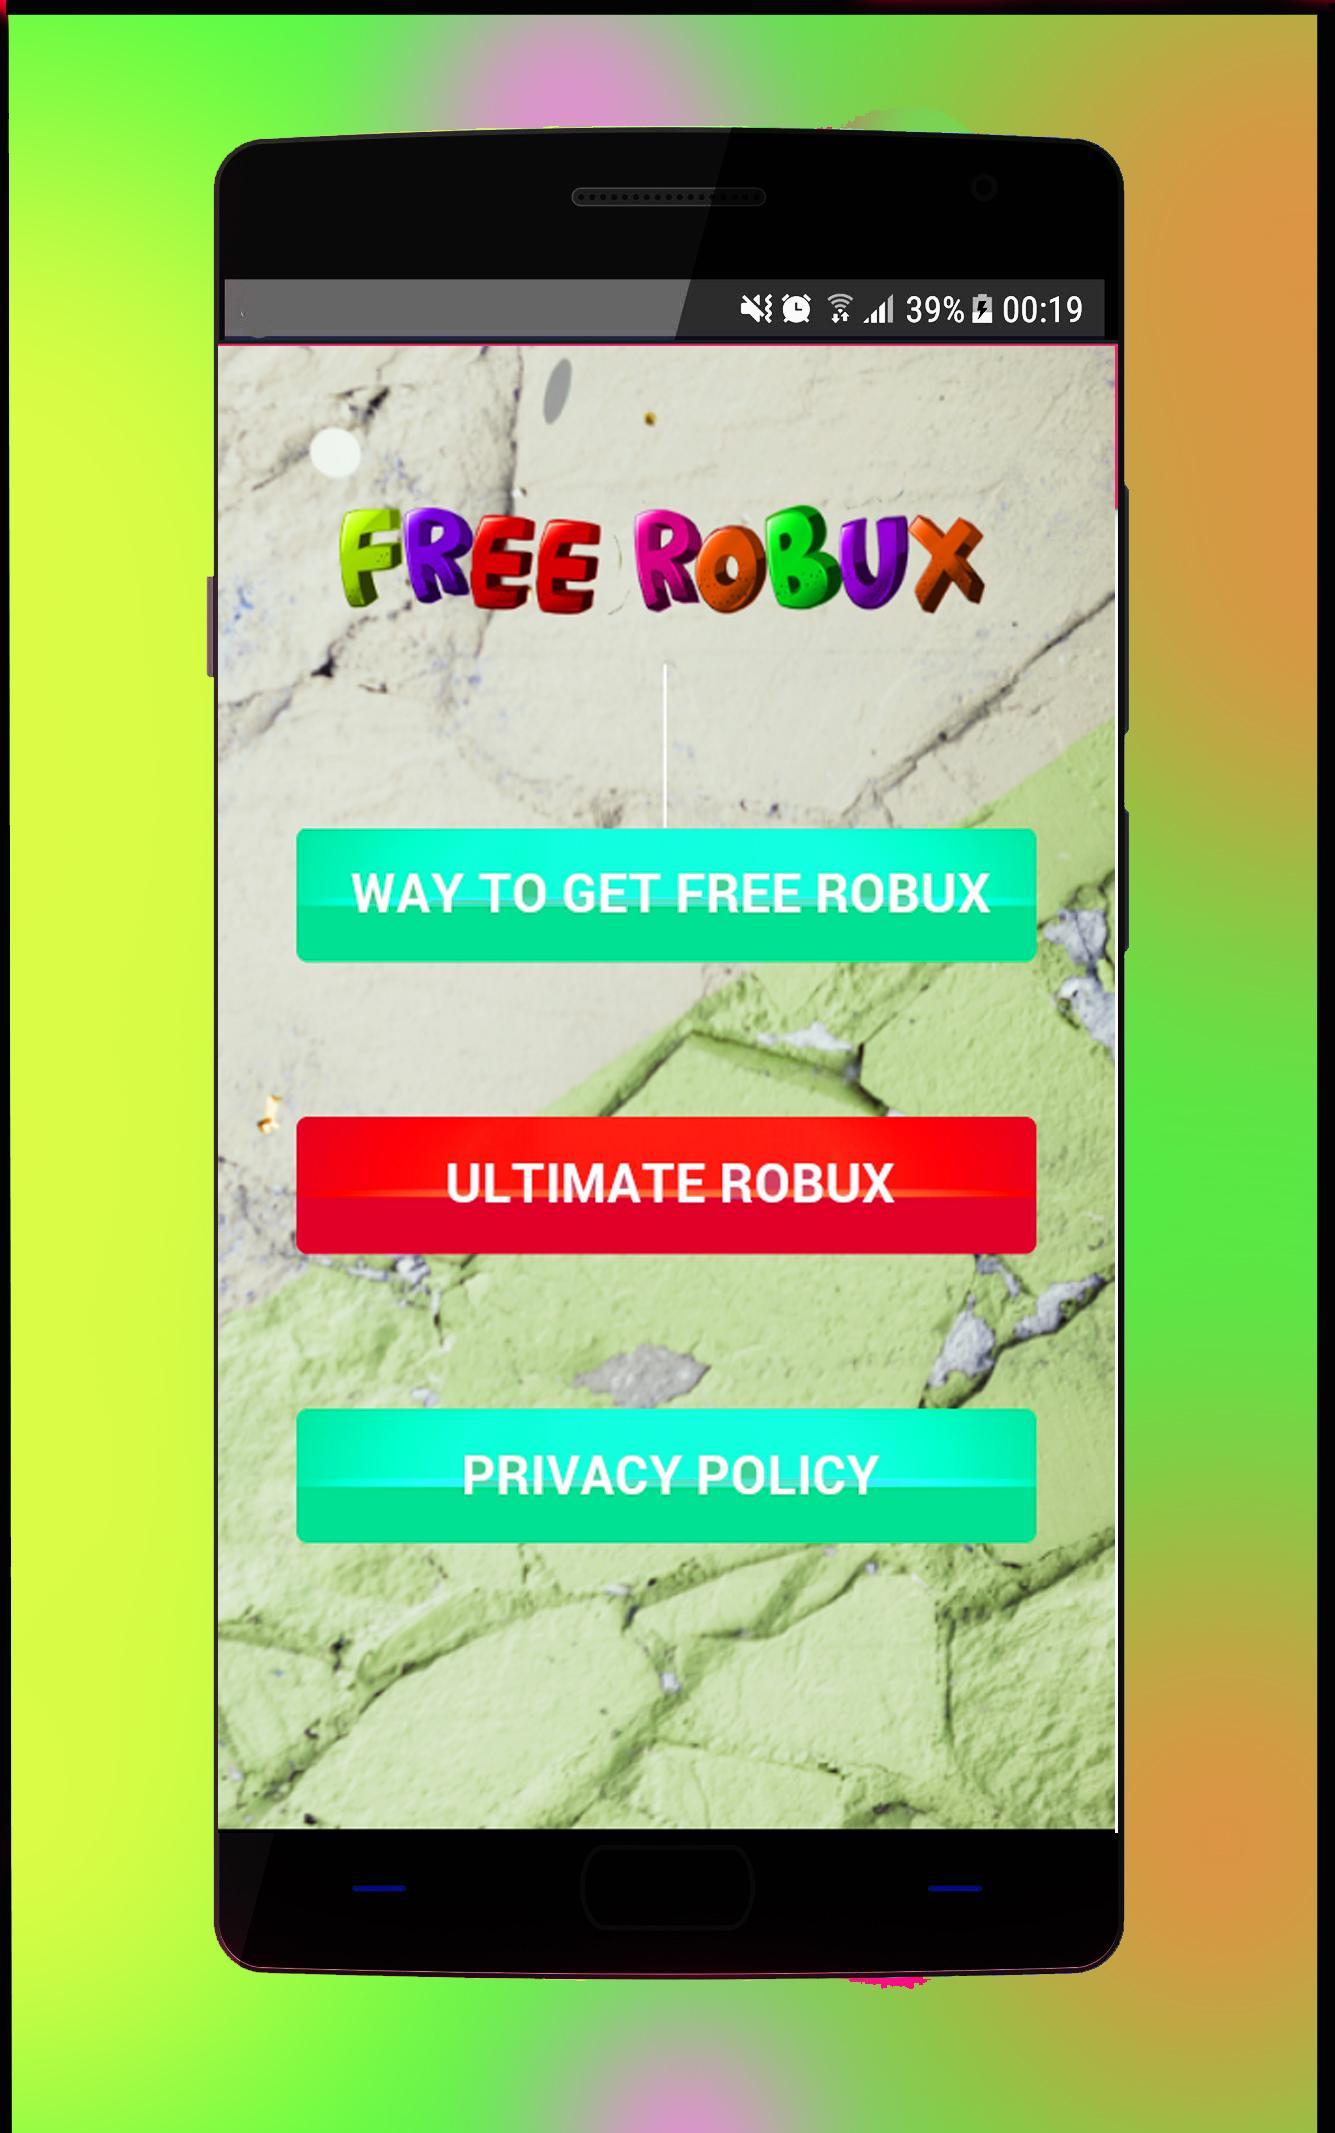 Get Free Robux Tips 2019 Now For Android Apk Download - apkpure free robux